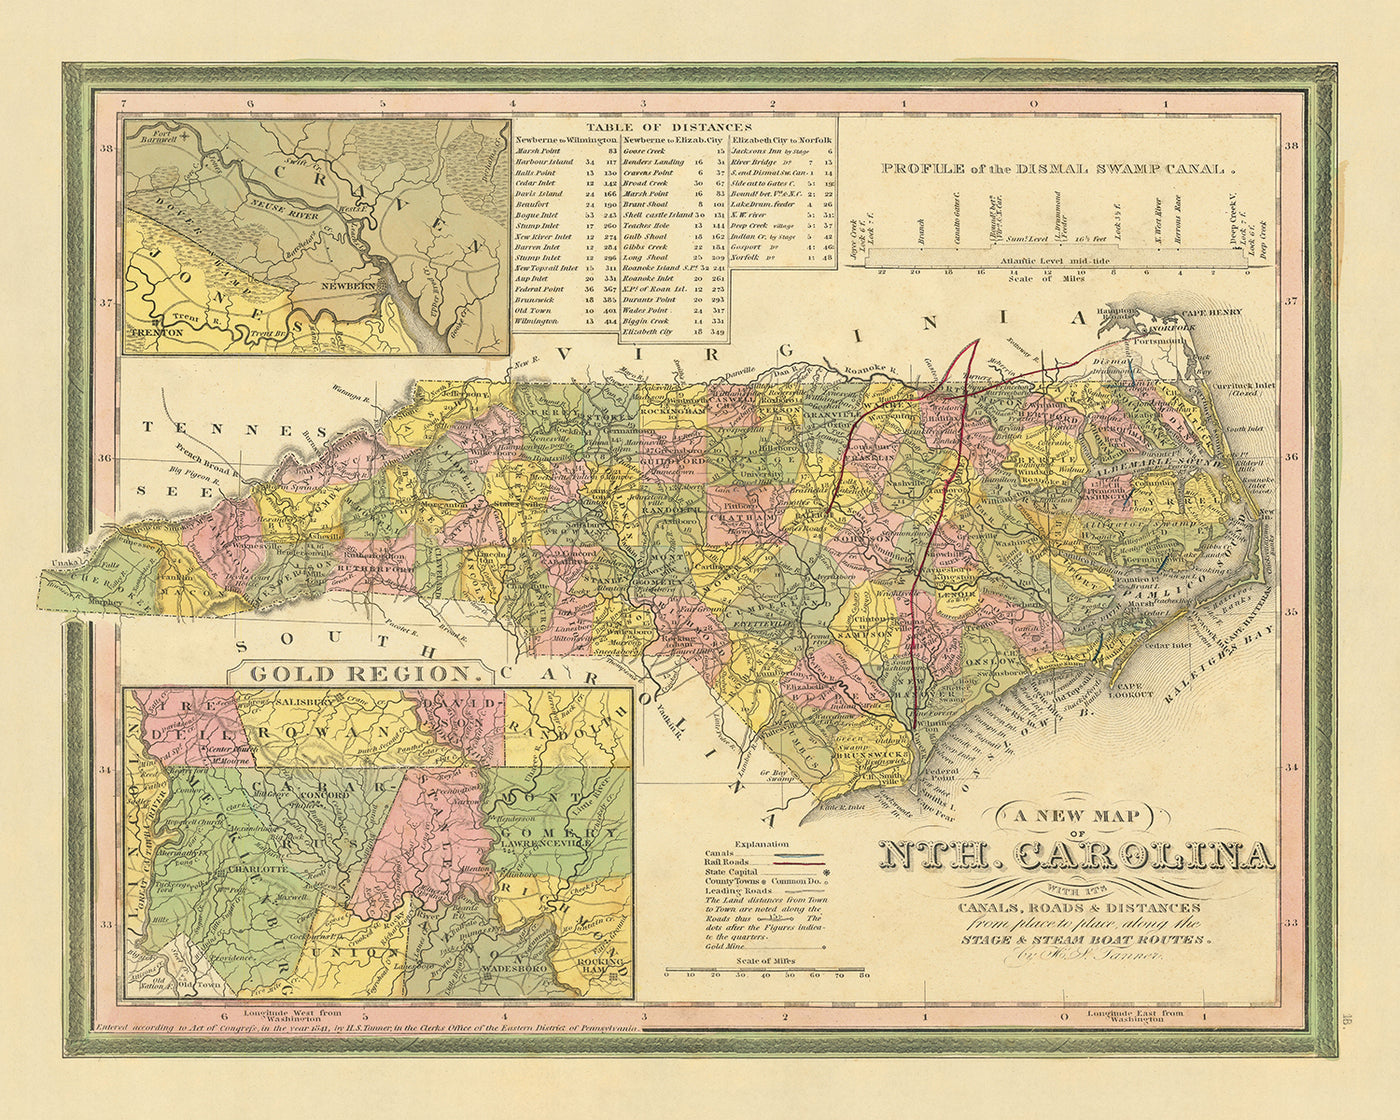 Old Map of North Carolina by Tanner, 1841: Raleigh, Charlotte, Asheville, Greensboro, and Wilmington